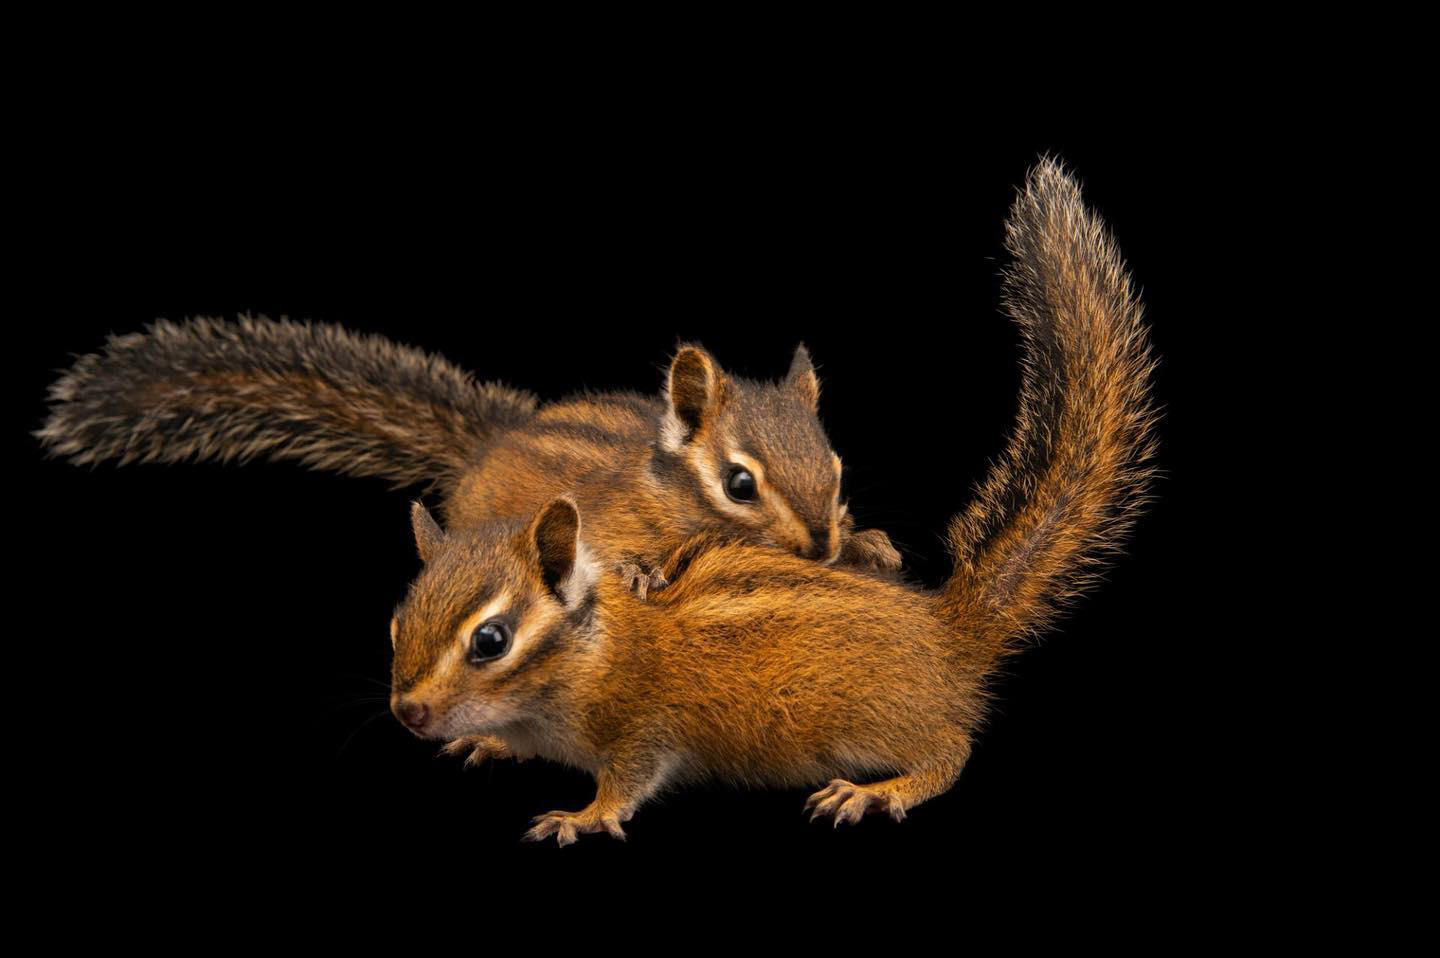 Larger than many other chipmunks, Townsend’s chipmunks can measure between 8 and 12 inches long